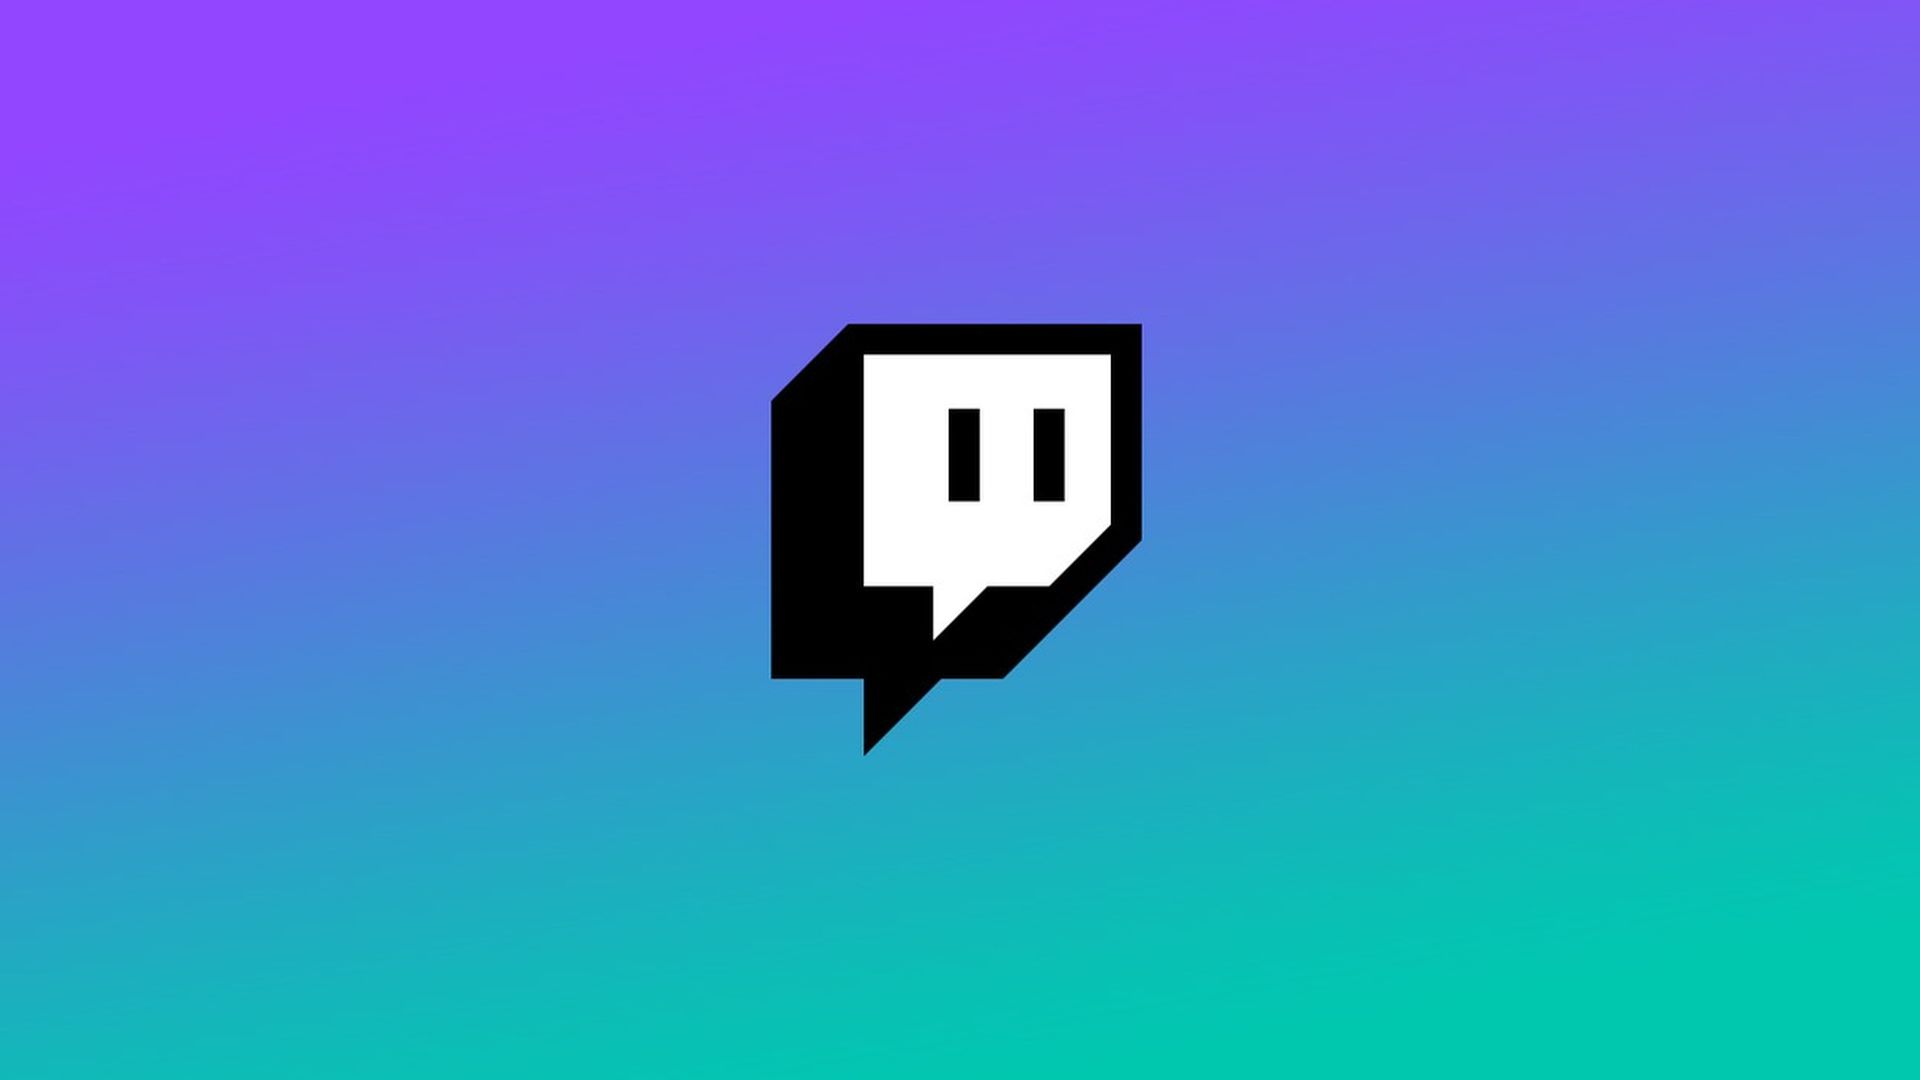 Twitch is reportedly considering more adverts on top channels